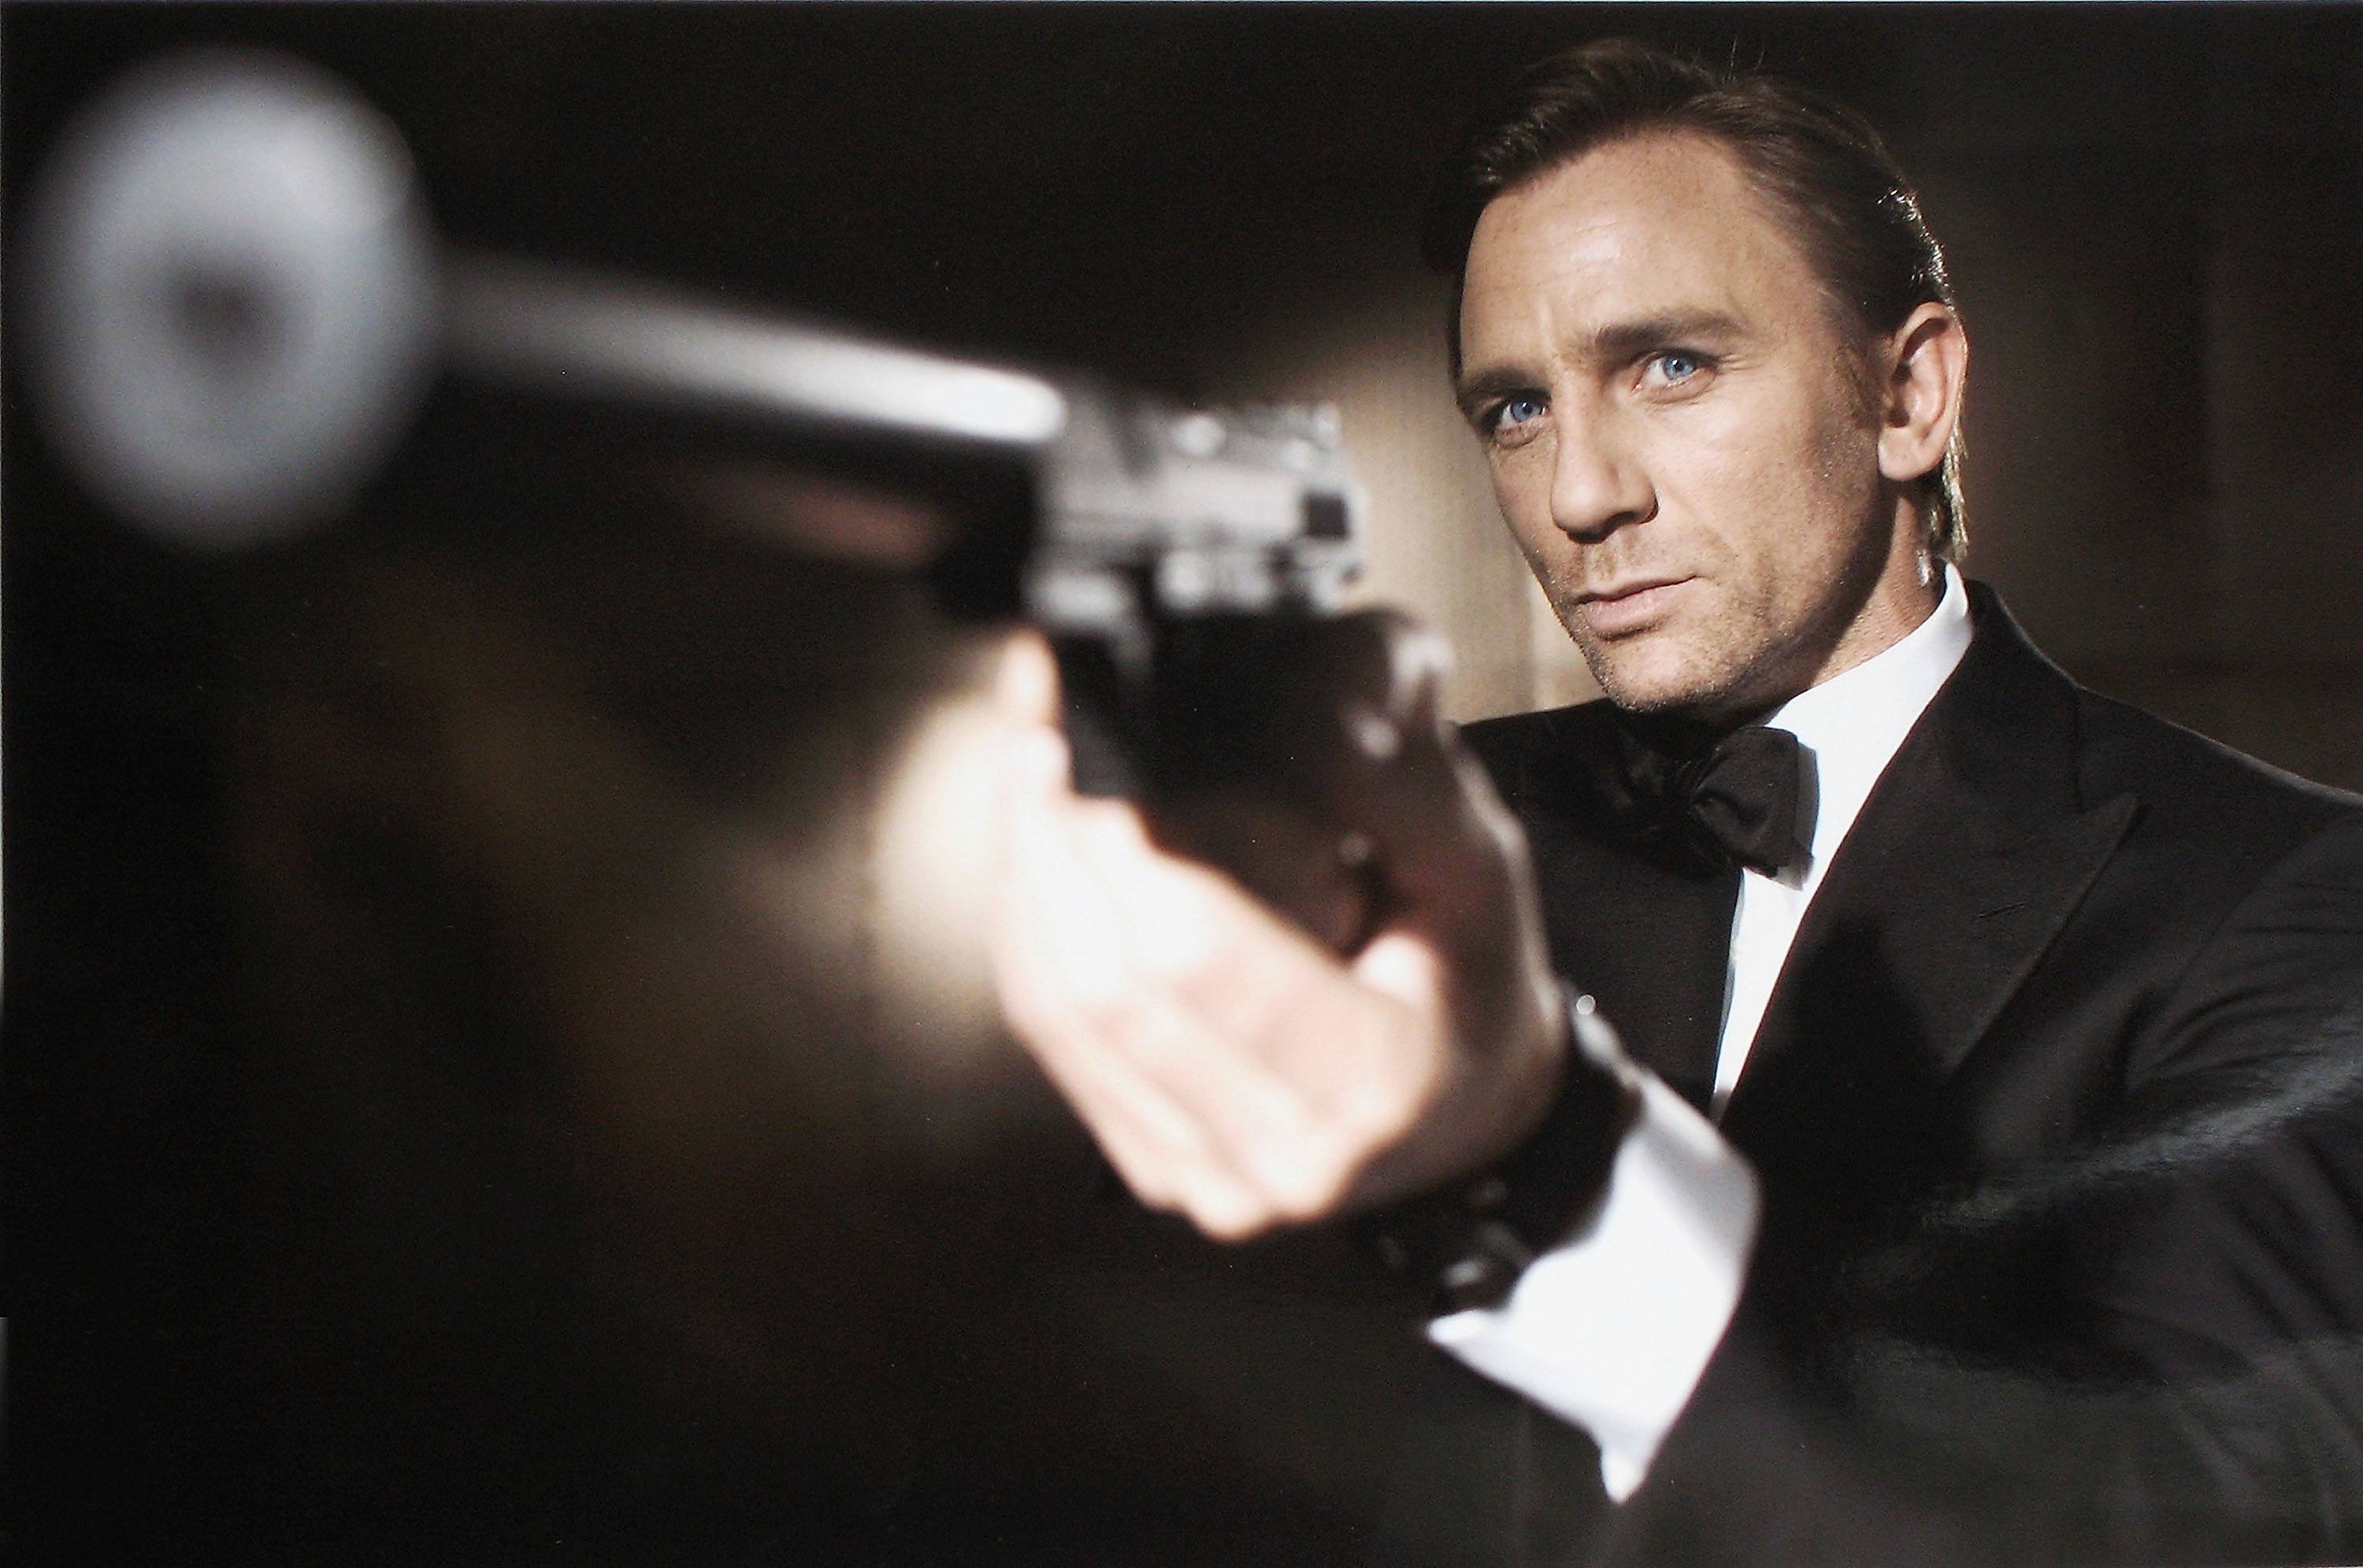 A James Bond Inspired Competition Show is In the Works at Prime Video